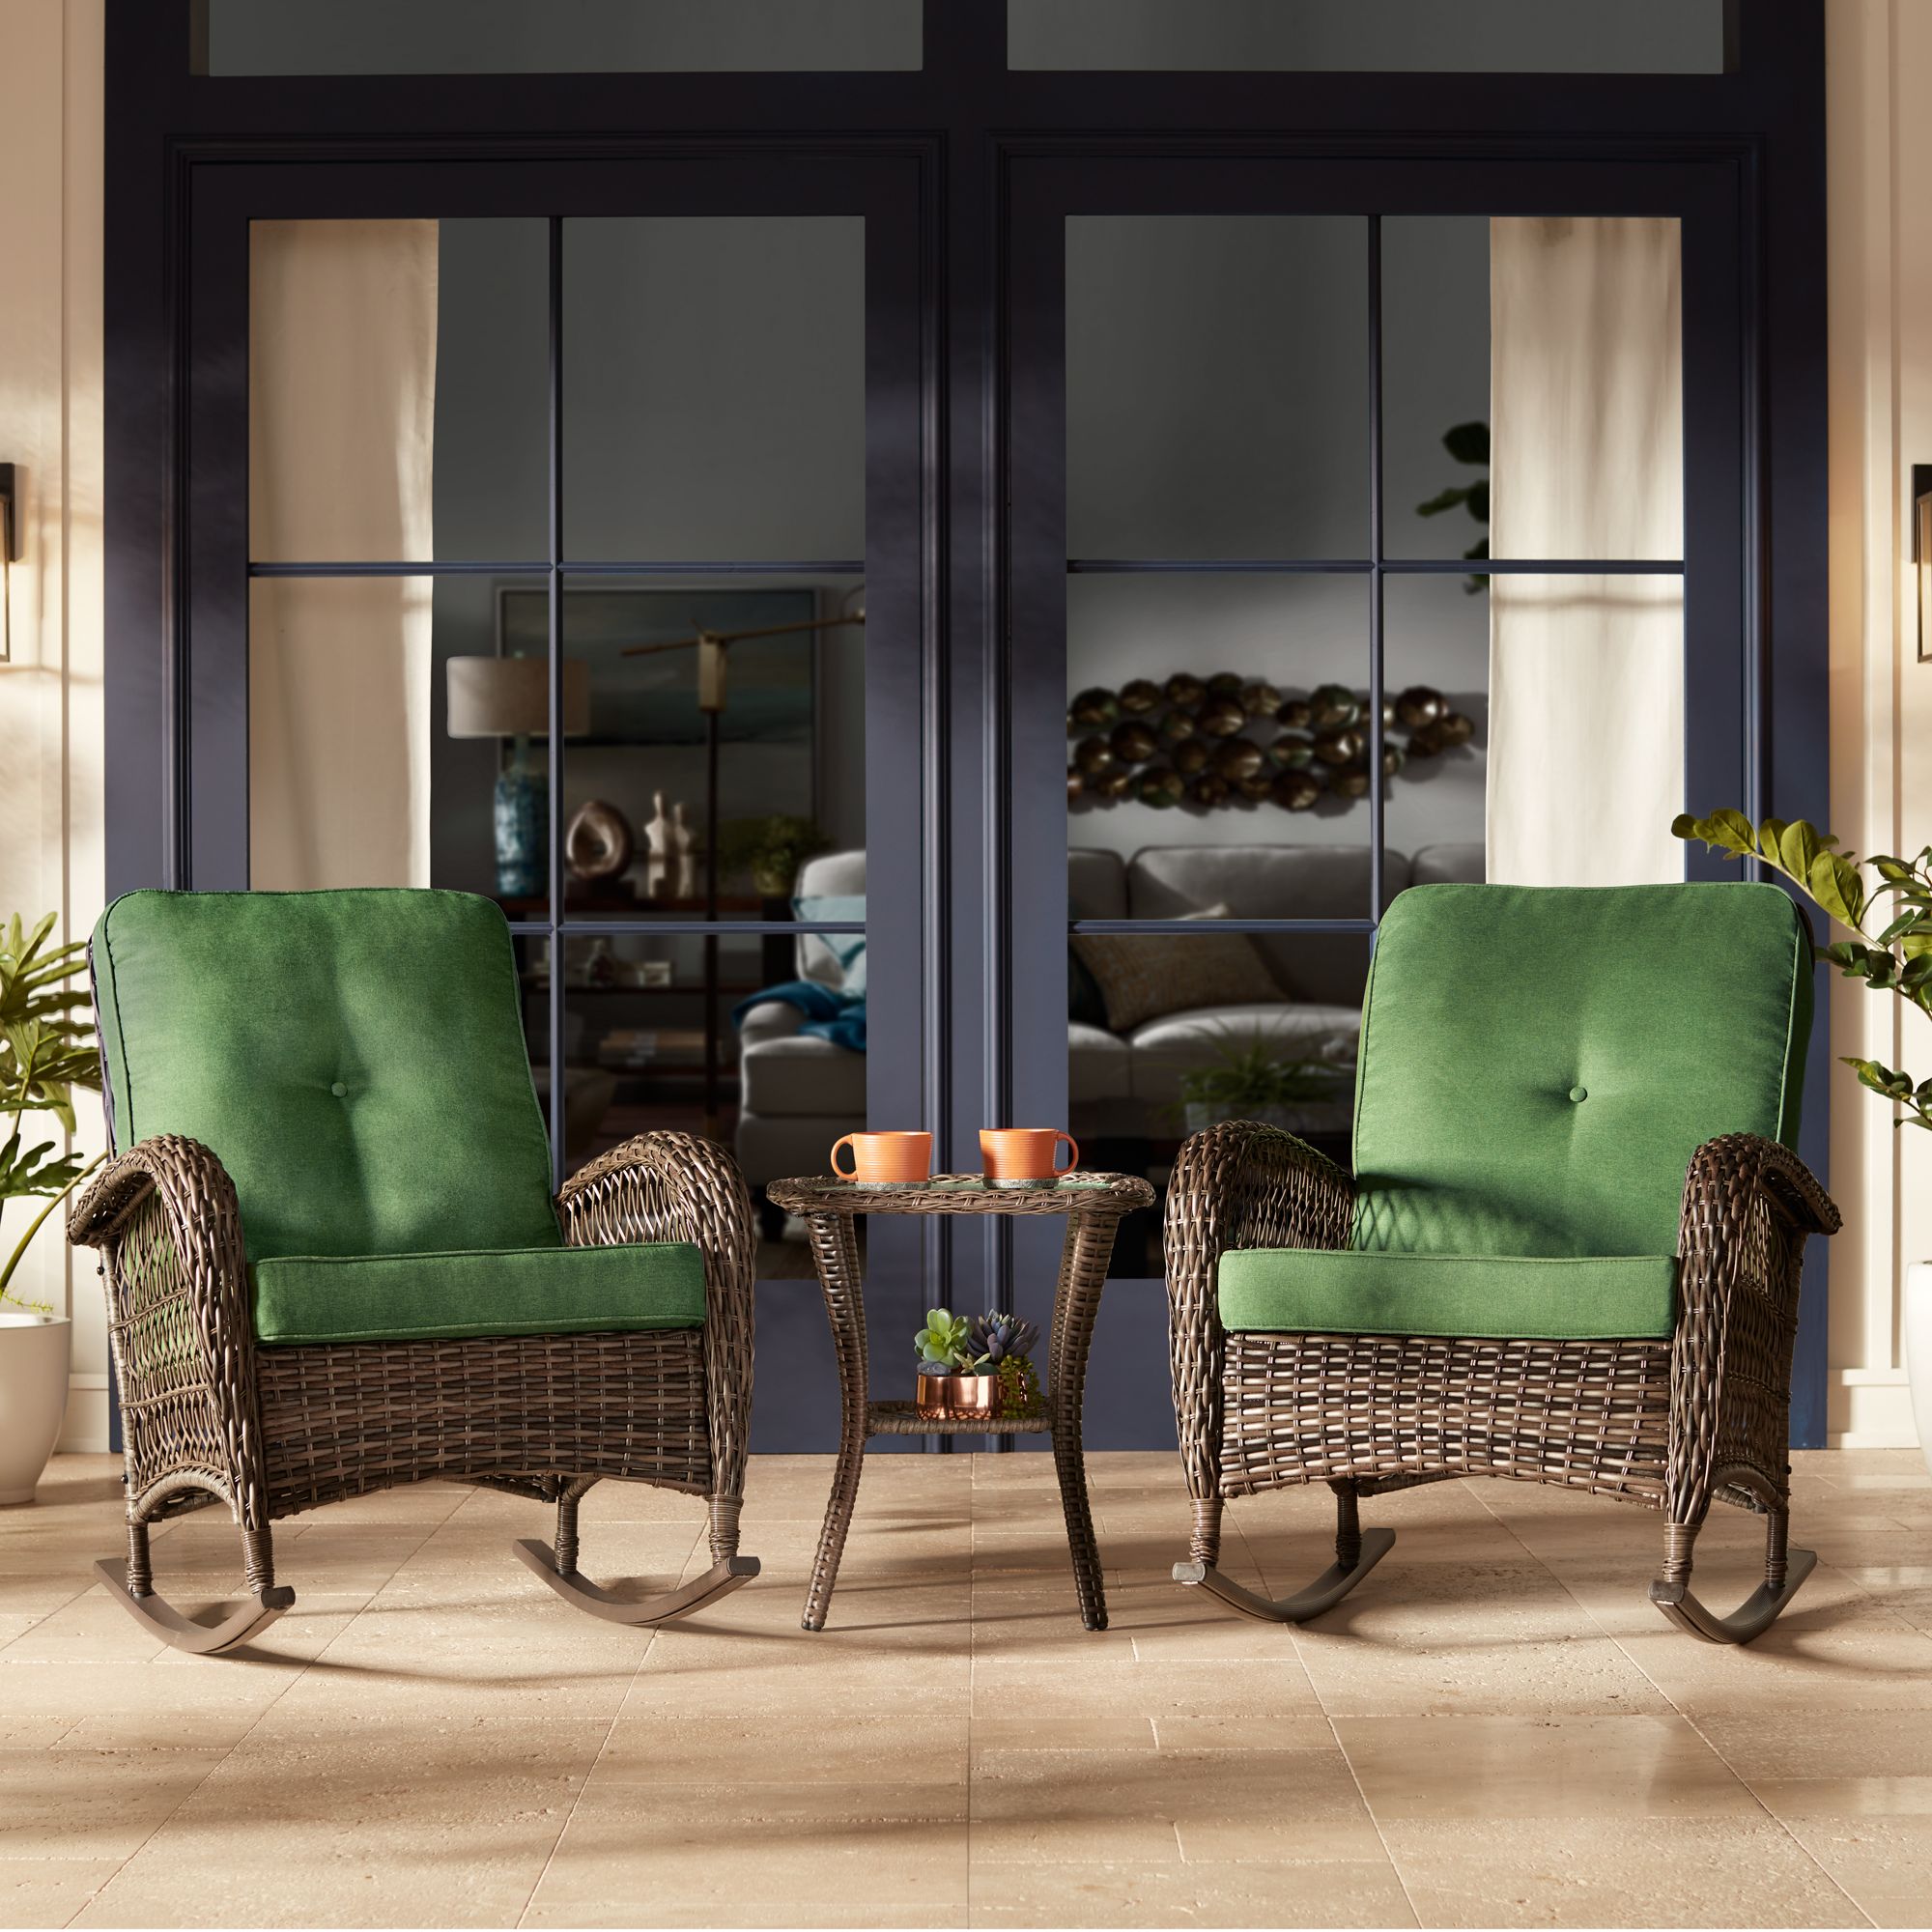 Teal Island Designs Madden 3 Piece Green and Rattan Outdoor Rocking Chair Set With Coffee Table - image 1 of 10